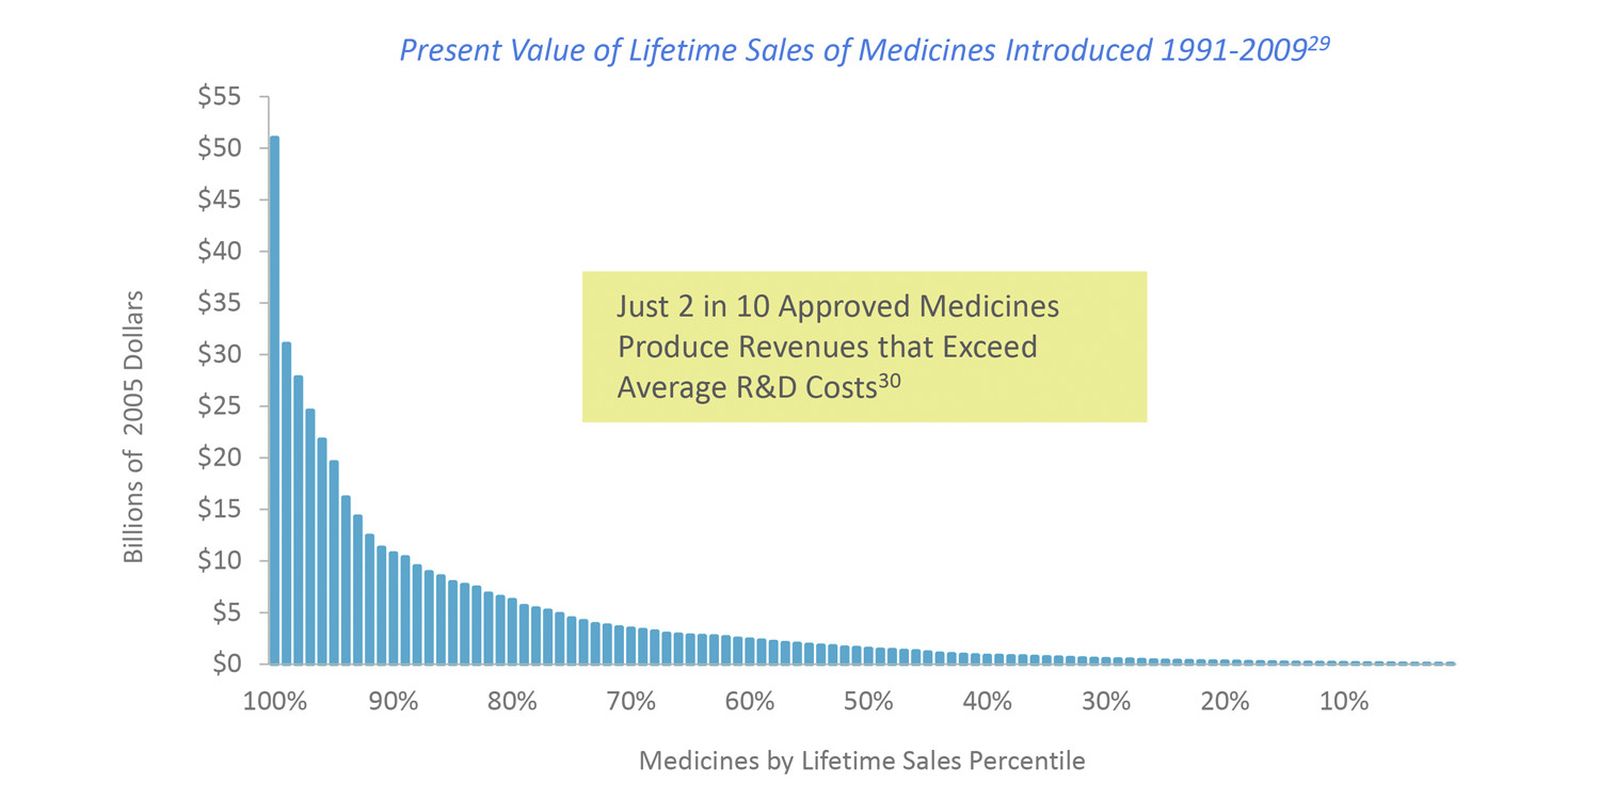 Present value of lifetime sales of medicines introduced: 1991-2009.